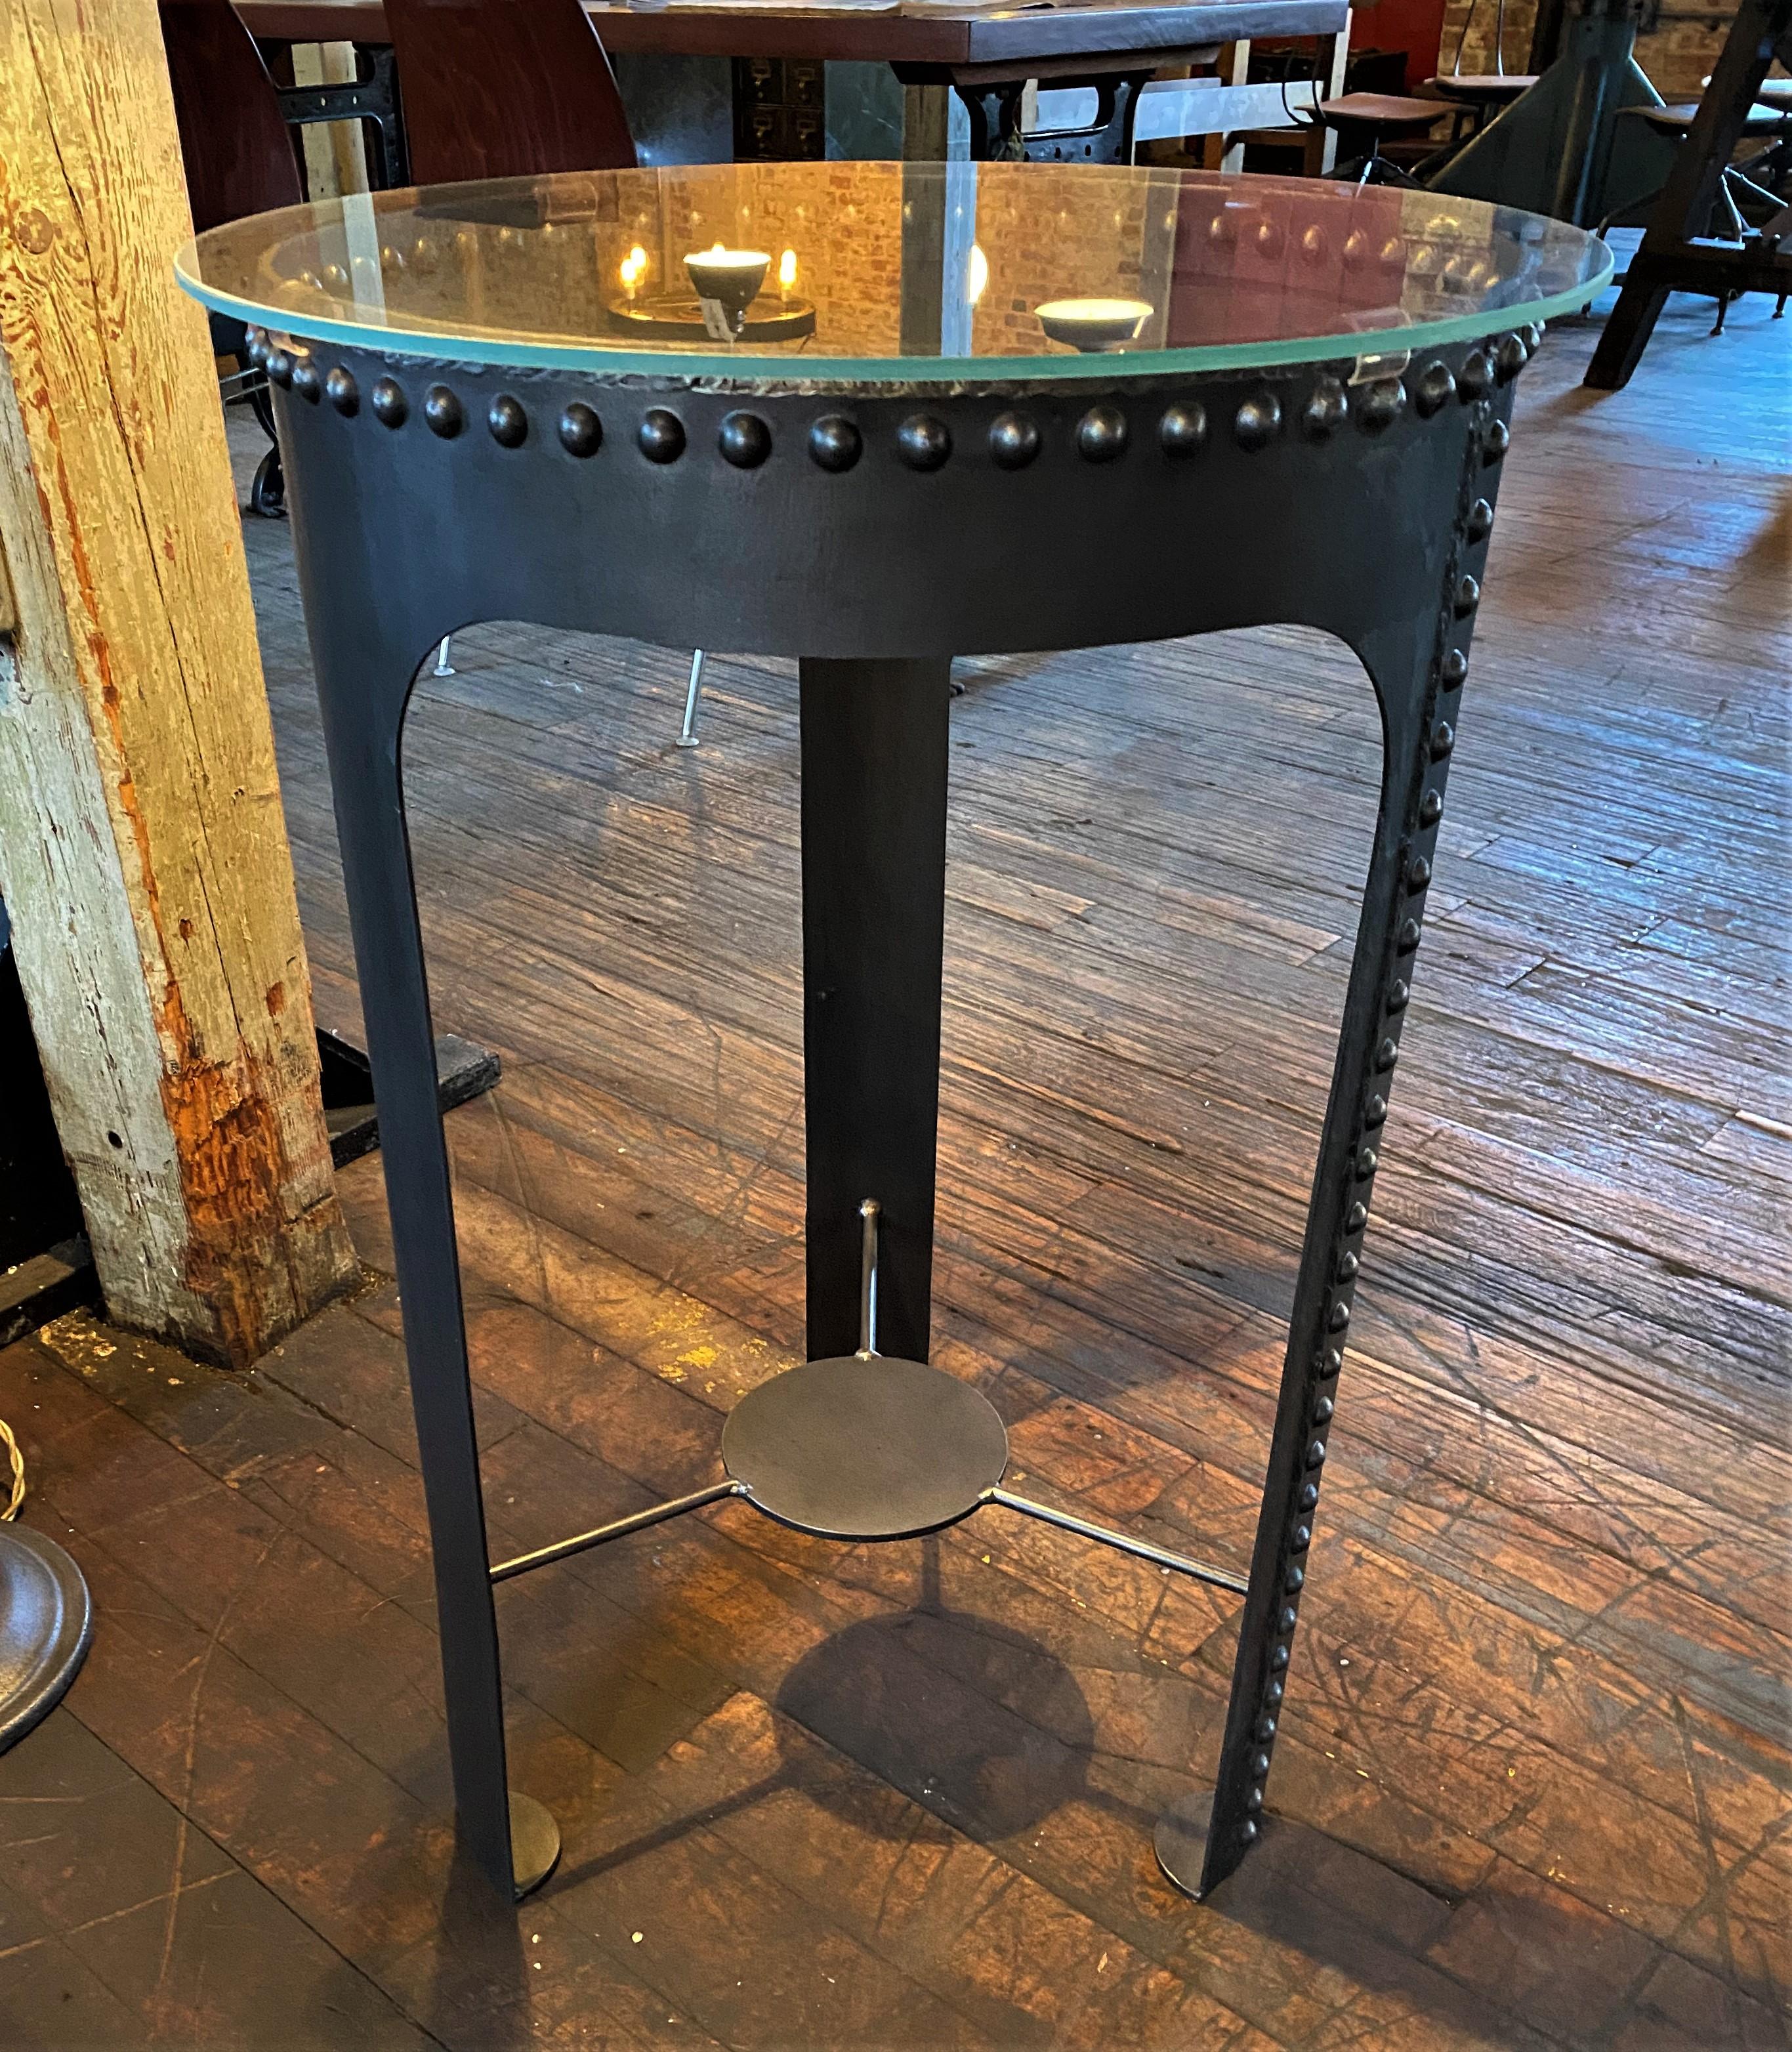 Steel riveted table

Overall dimensions: 20